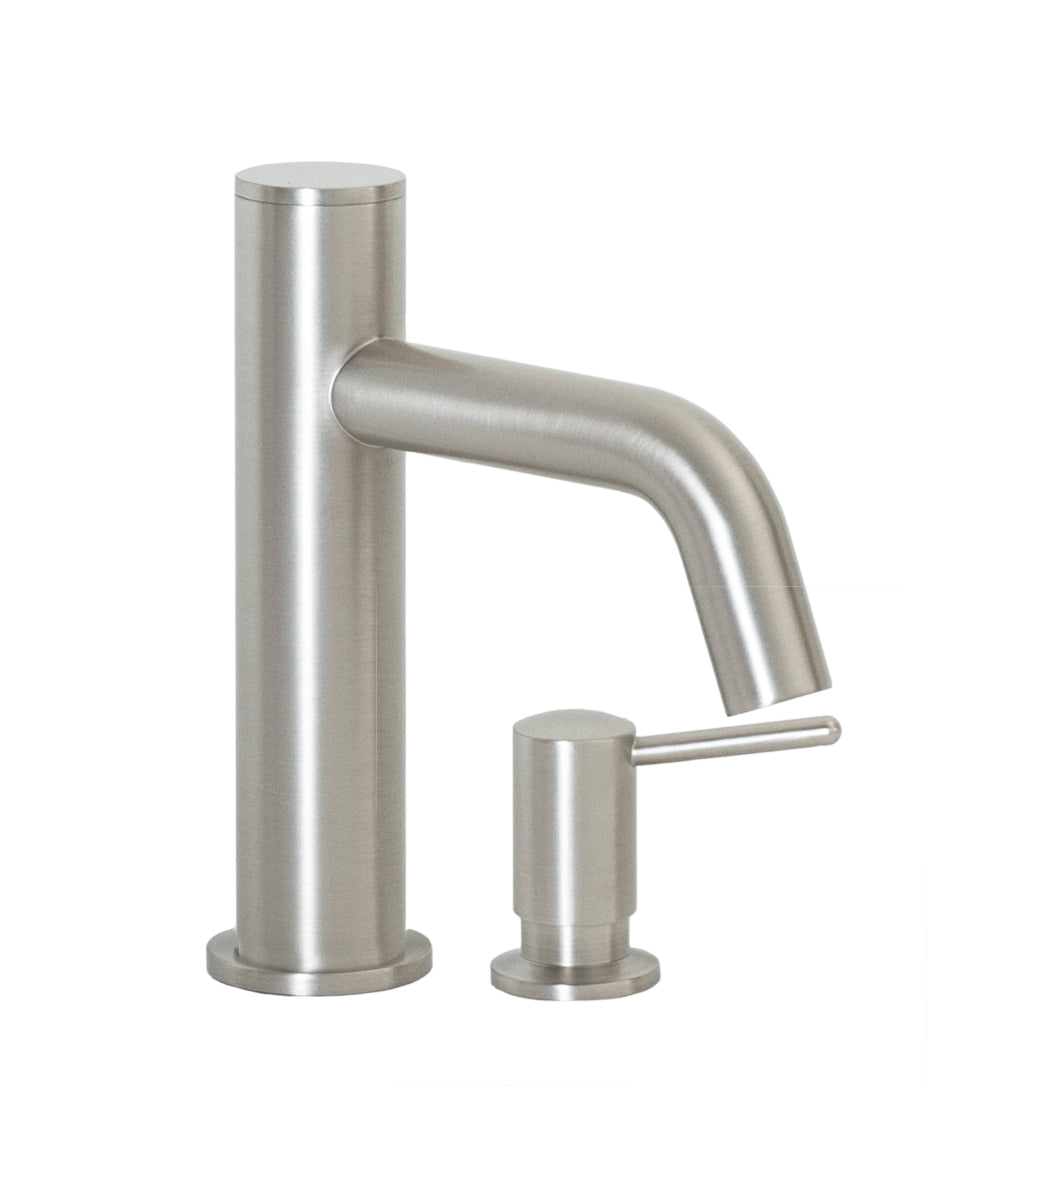 FA-3260S Automatic Faucet with 6” Spout Reach and Manual Soap Dispenser In Satin Nickel